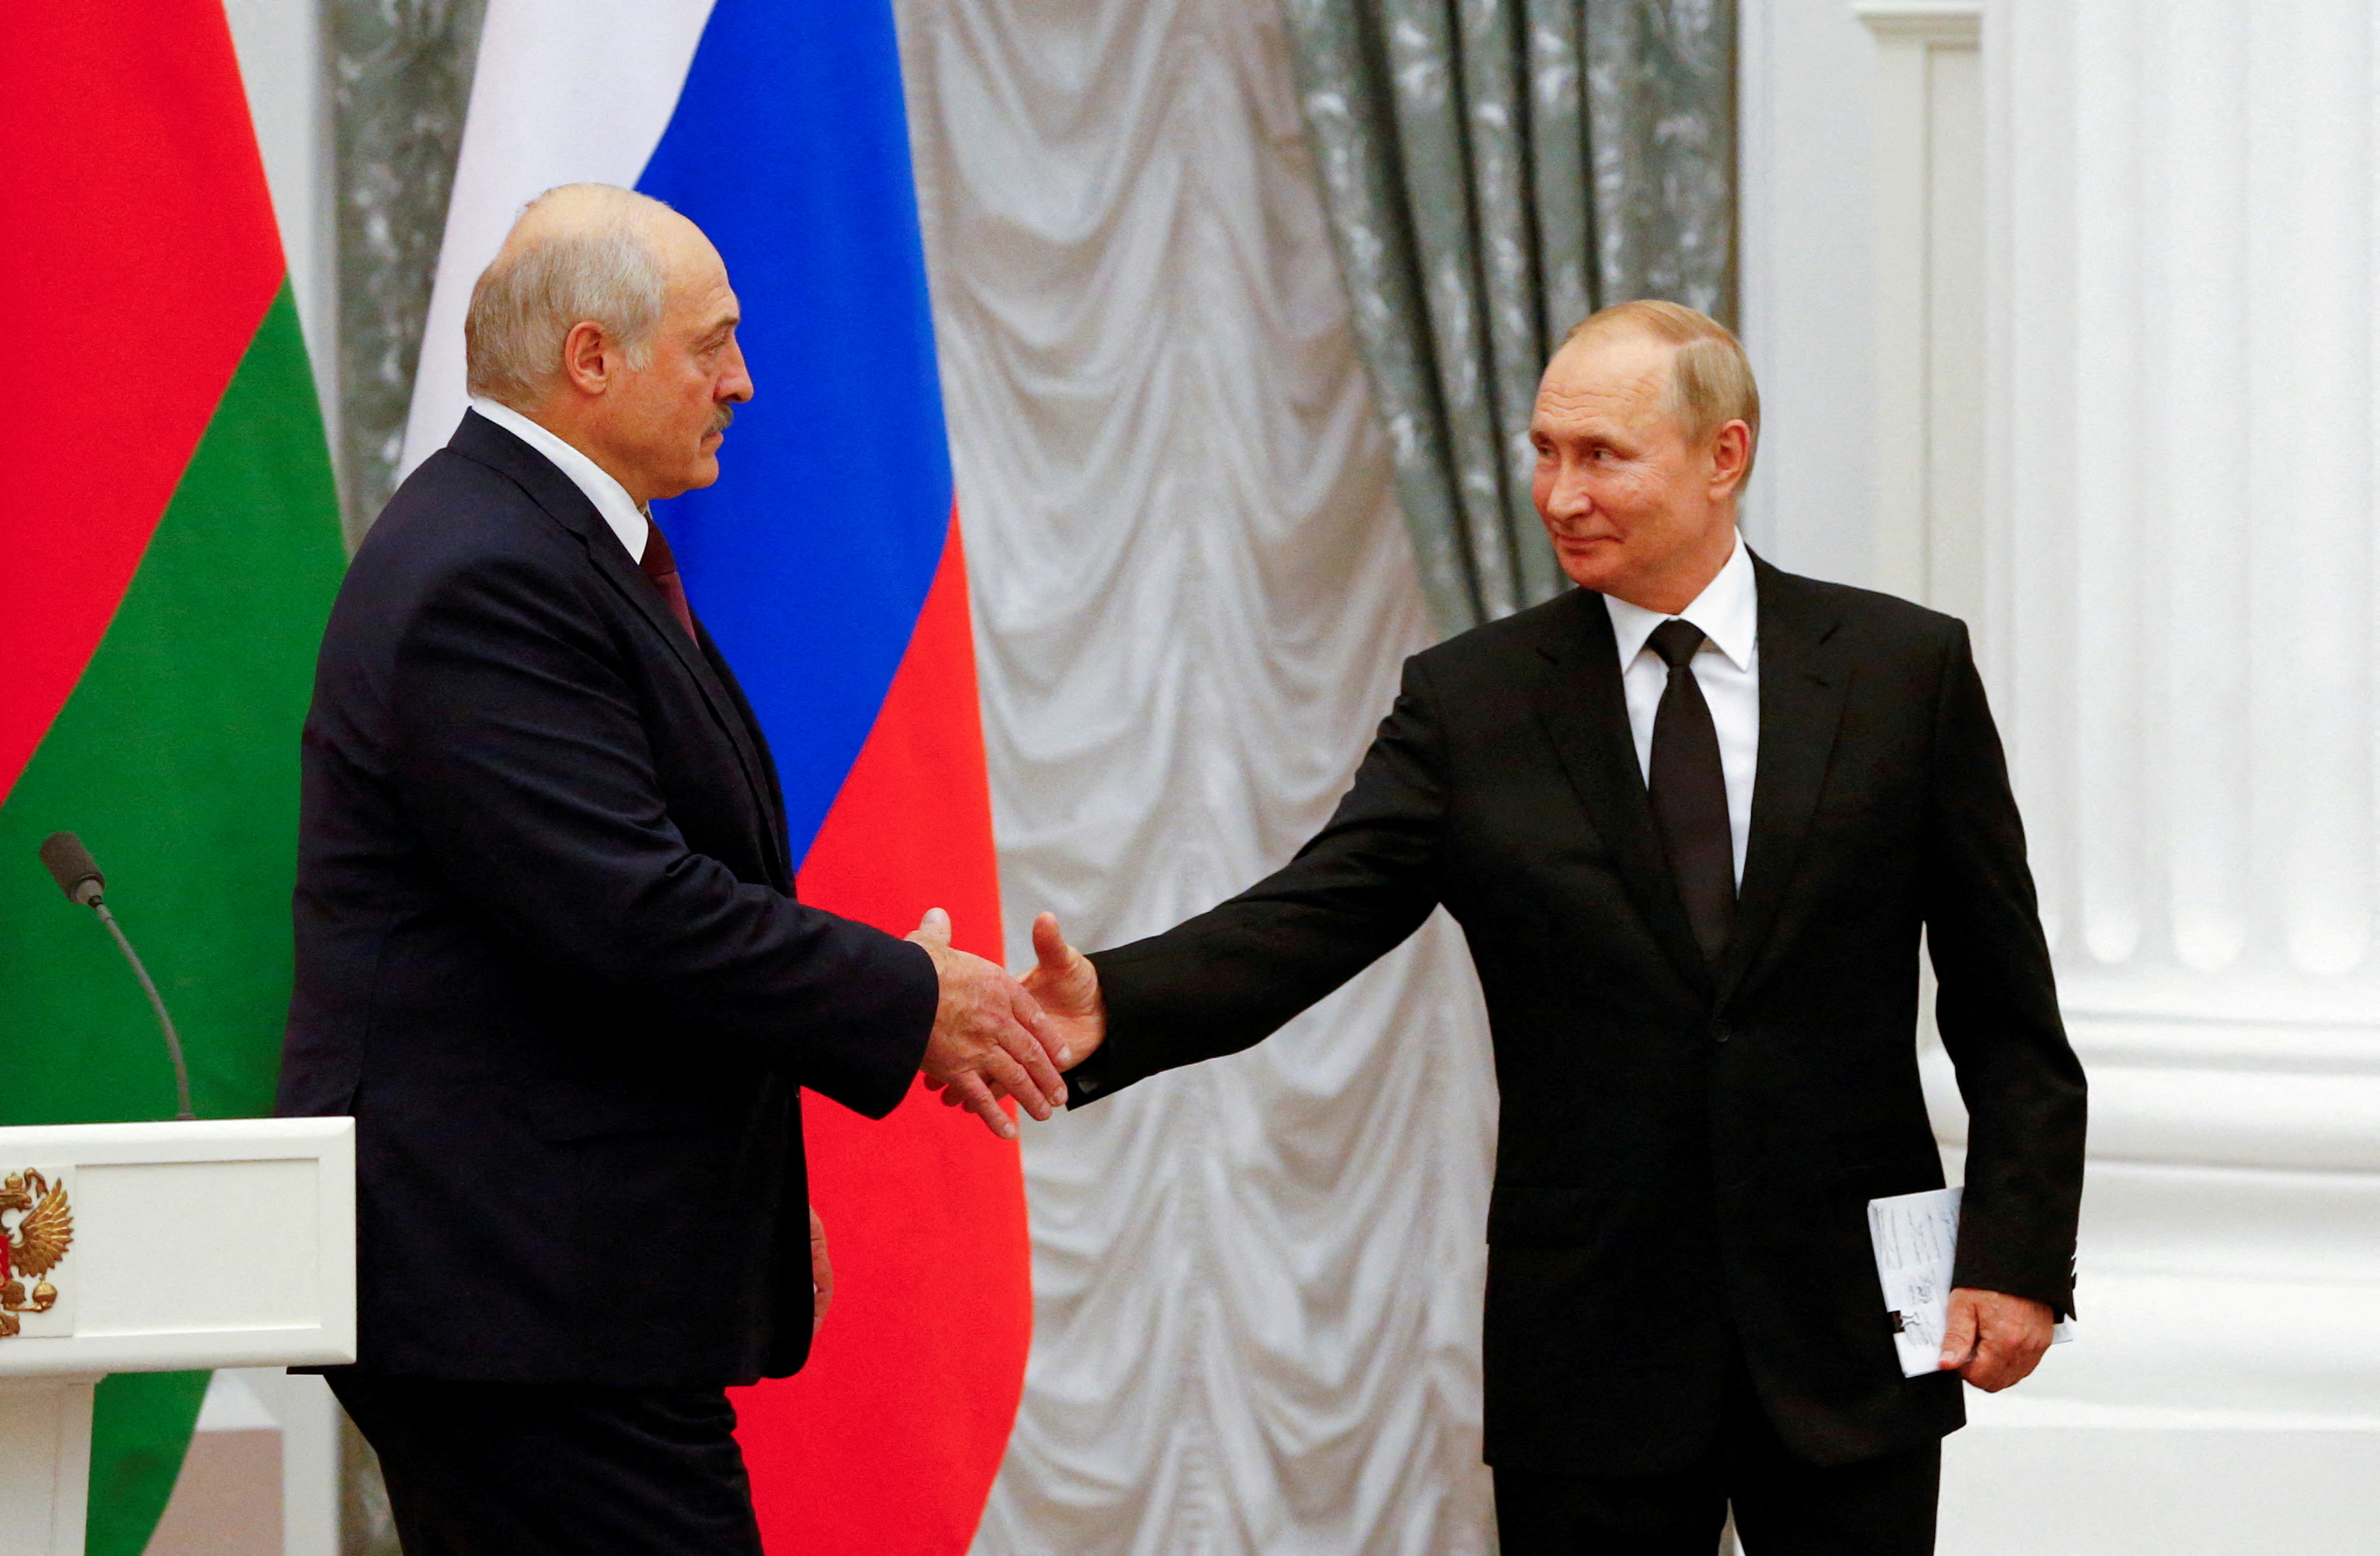 Russian President Putin and Belarusian leader Lukashenko attend a news conference in Moscow